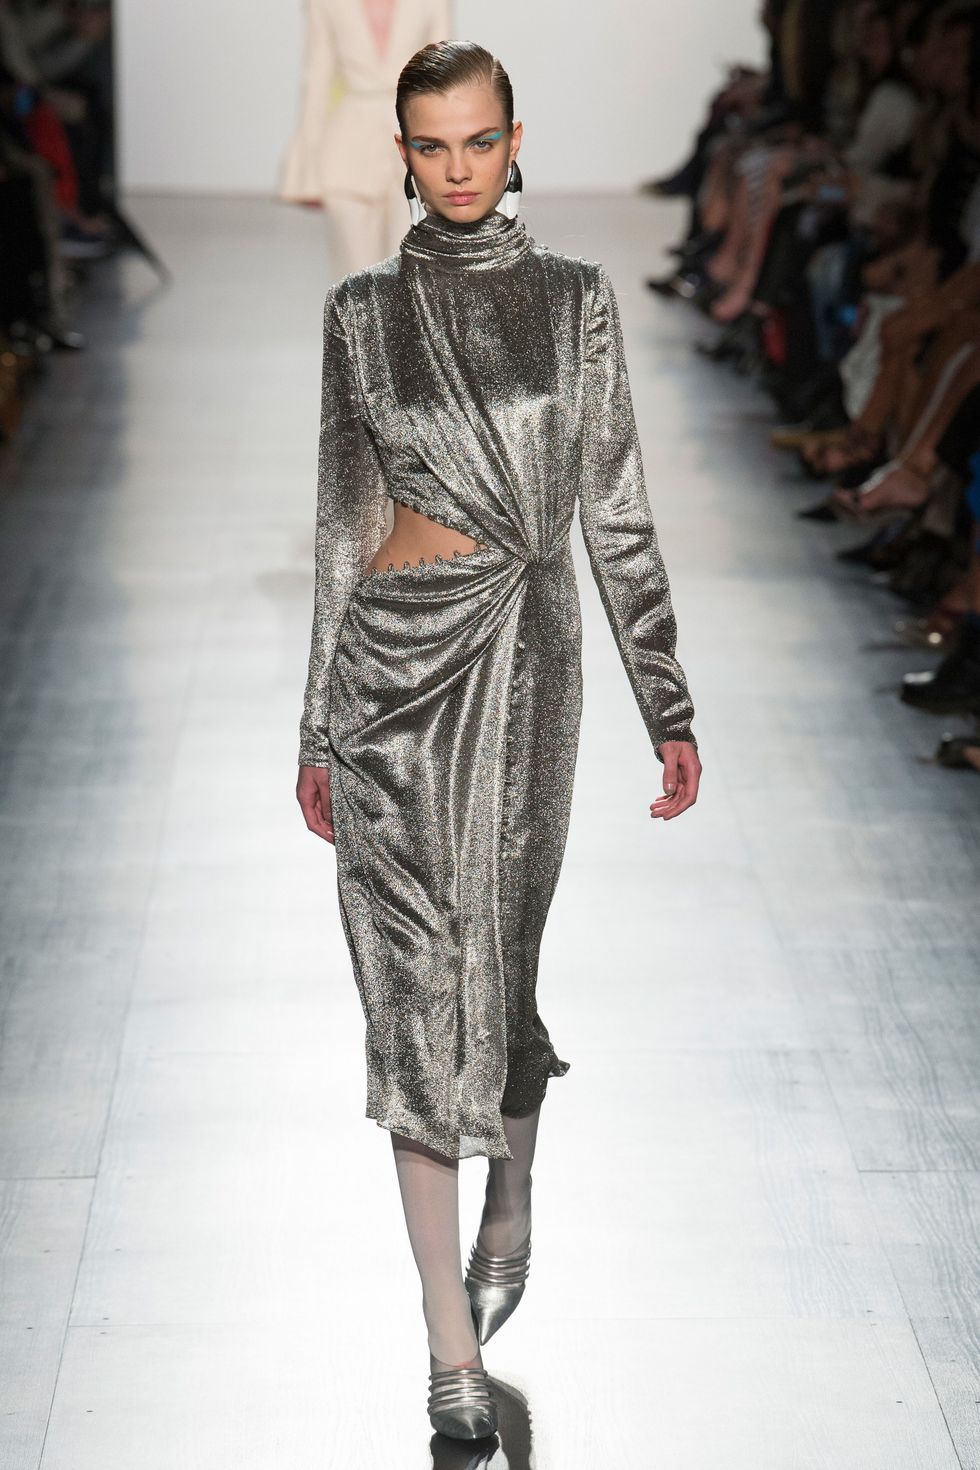 silver souls: our moments with futuristic fashion – a magazine